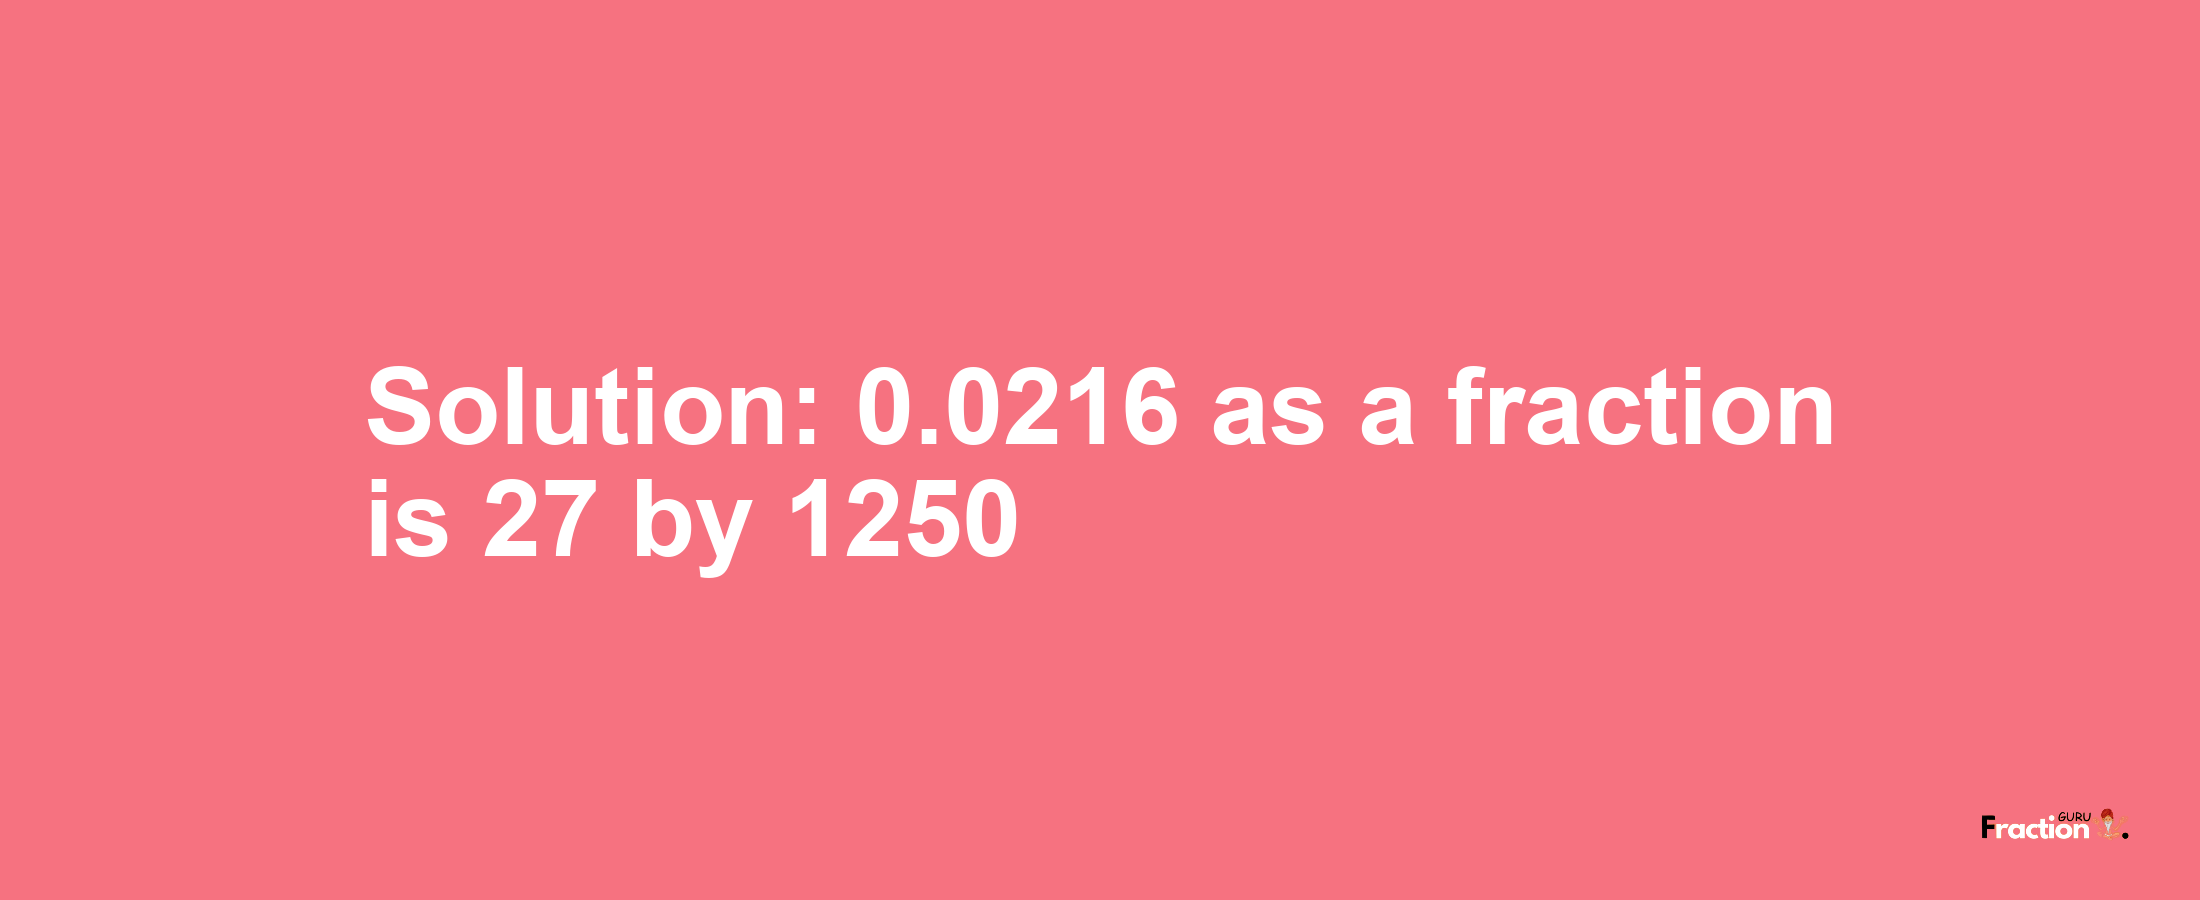 Solution:0.0216 as a fraction is 27/1250